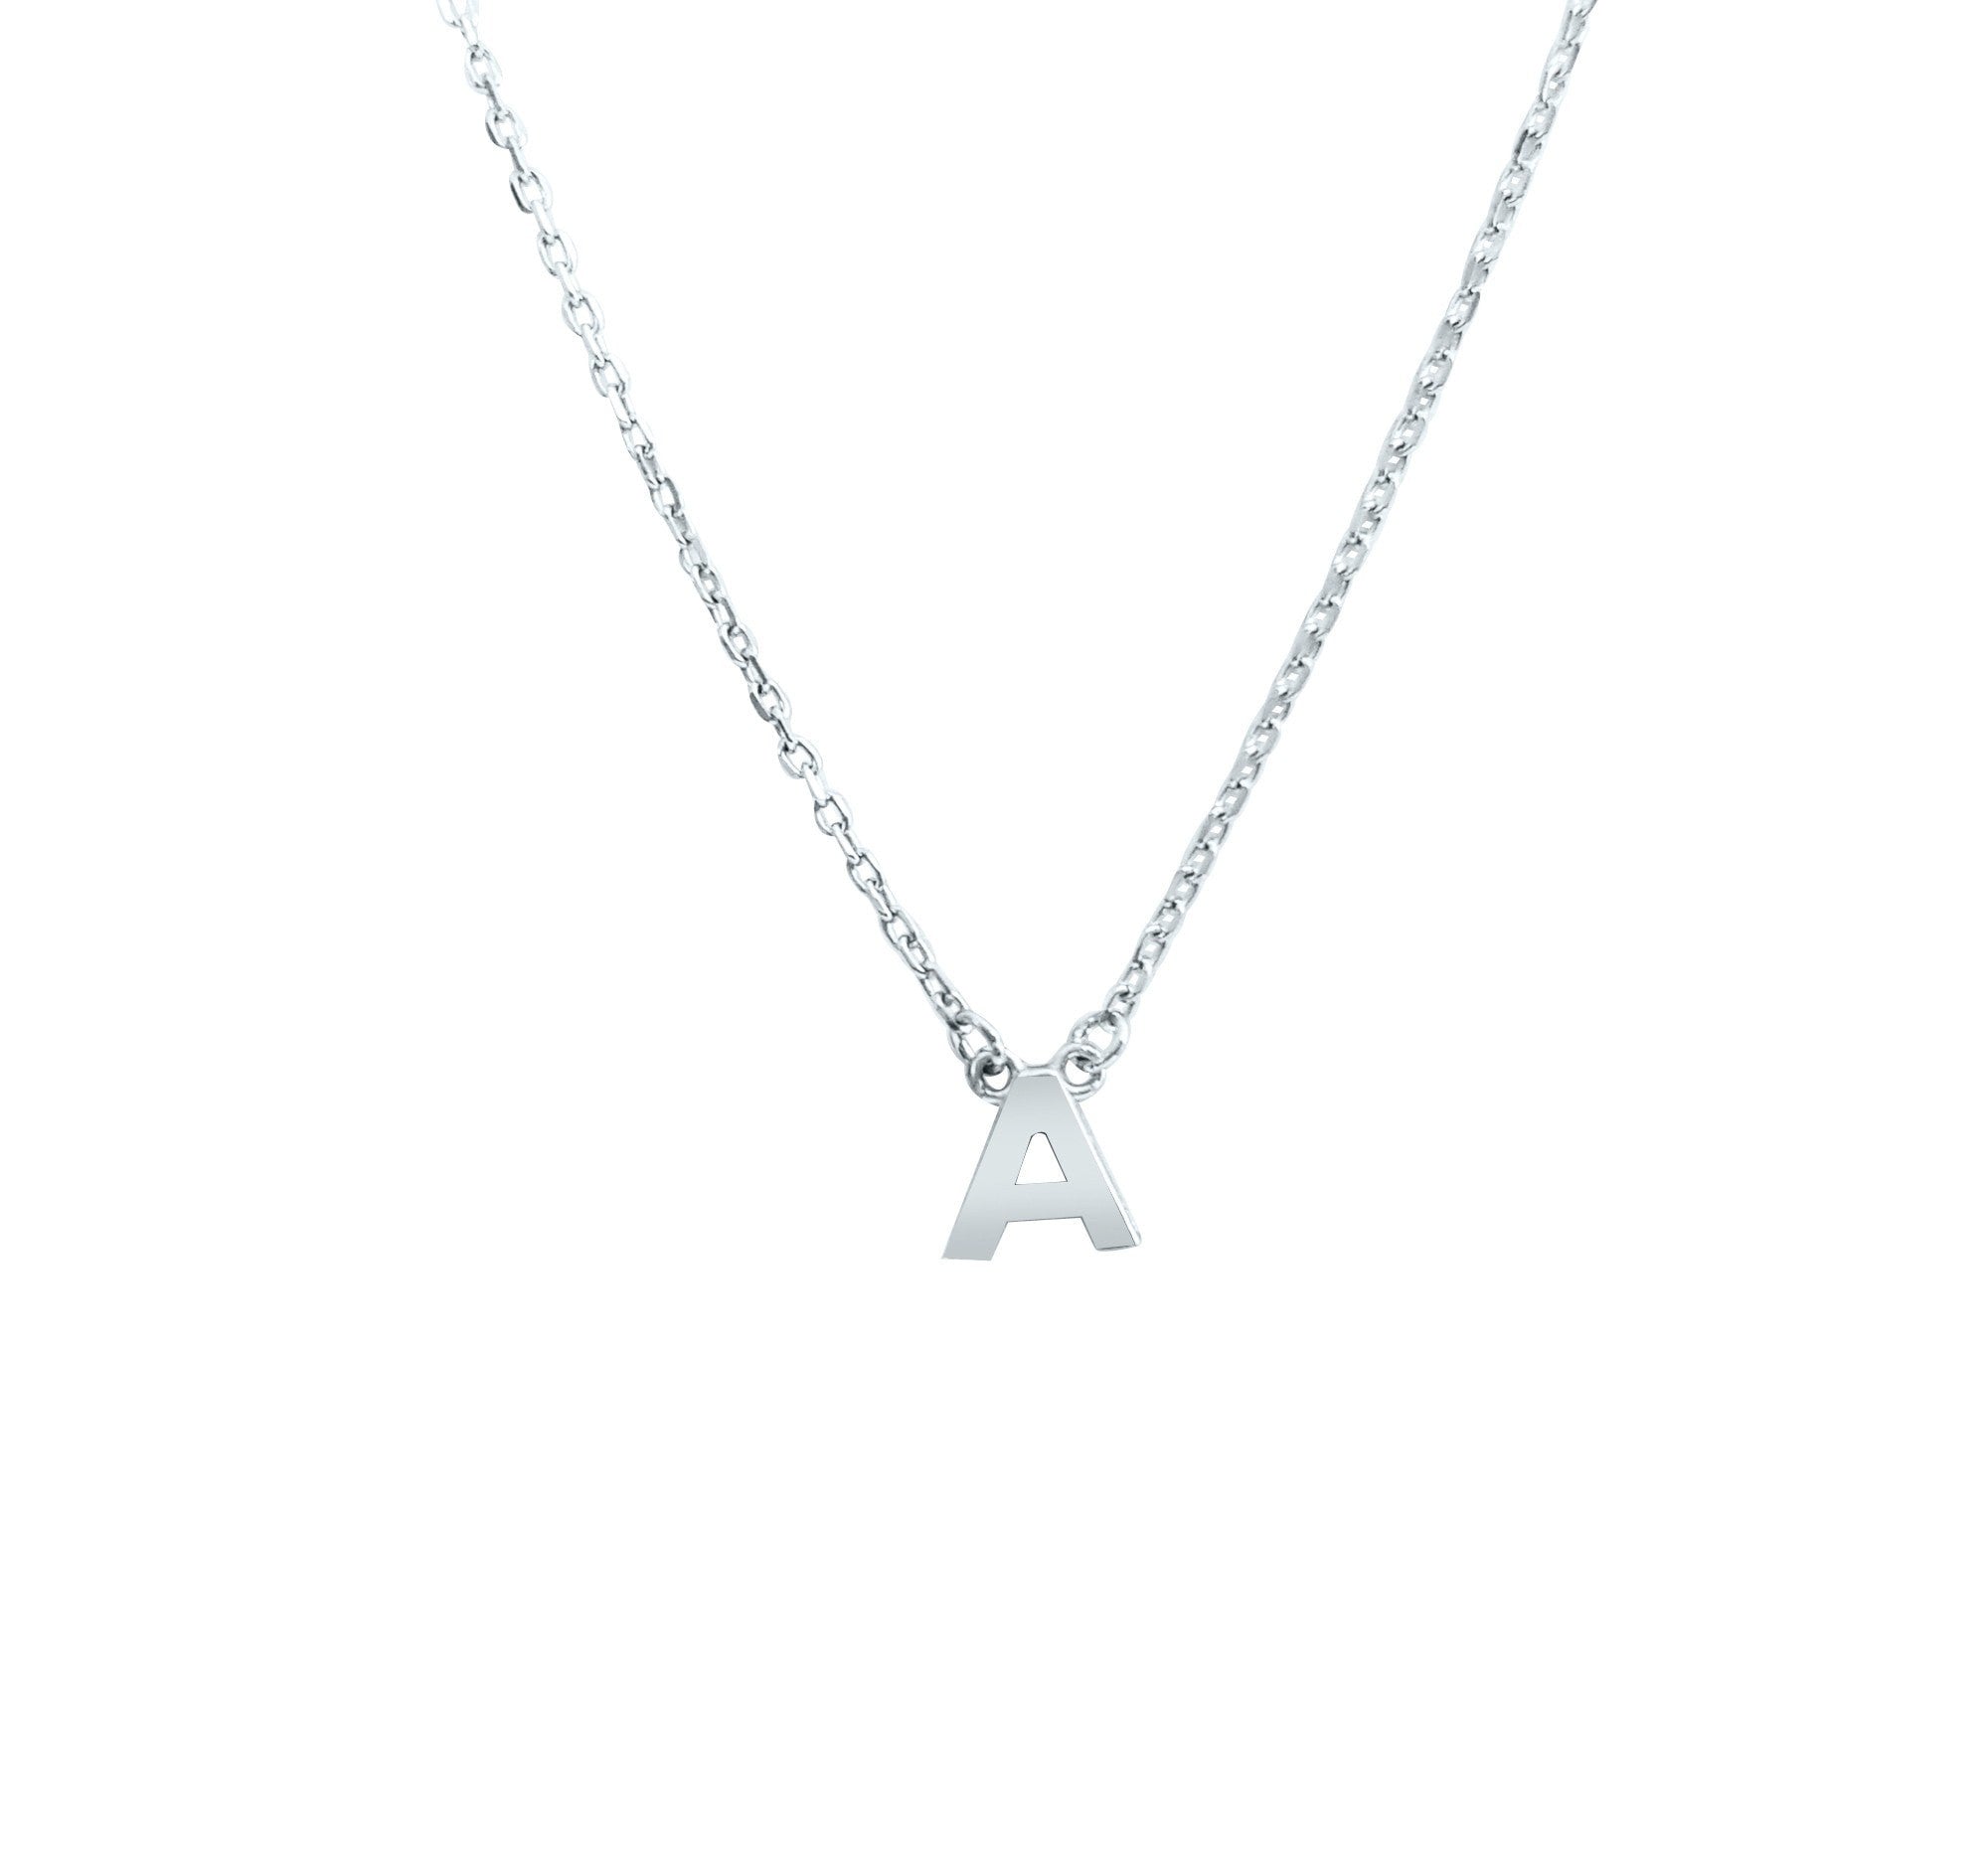 Duo Jewellery Necklaces A Duo Initial Silver Necklace